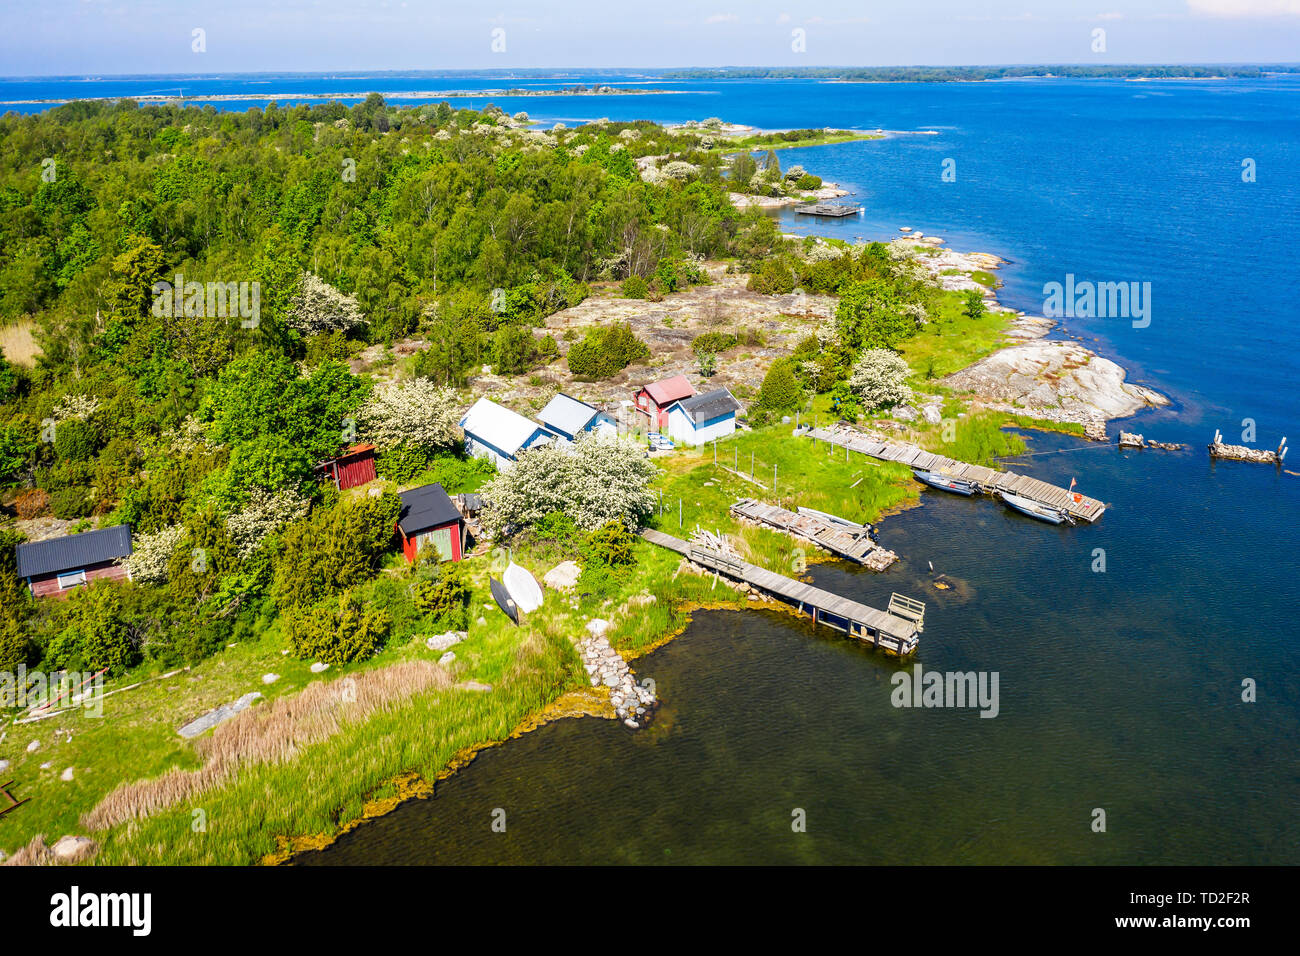 Typical view of Blekinge archipelago in southern Sweden on a sunny summer day. Traditional fishing sheds and jetties on green islands. Stock Photo